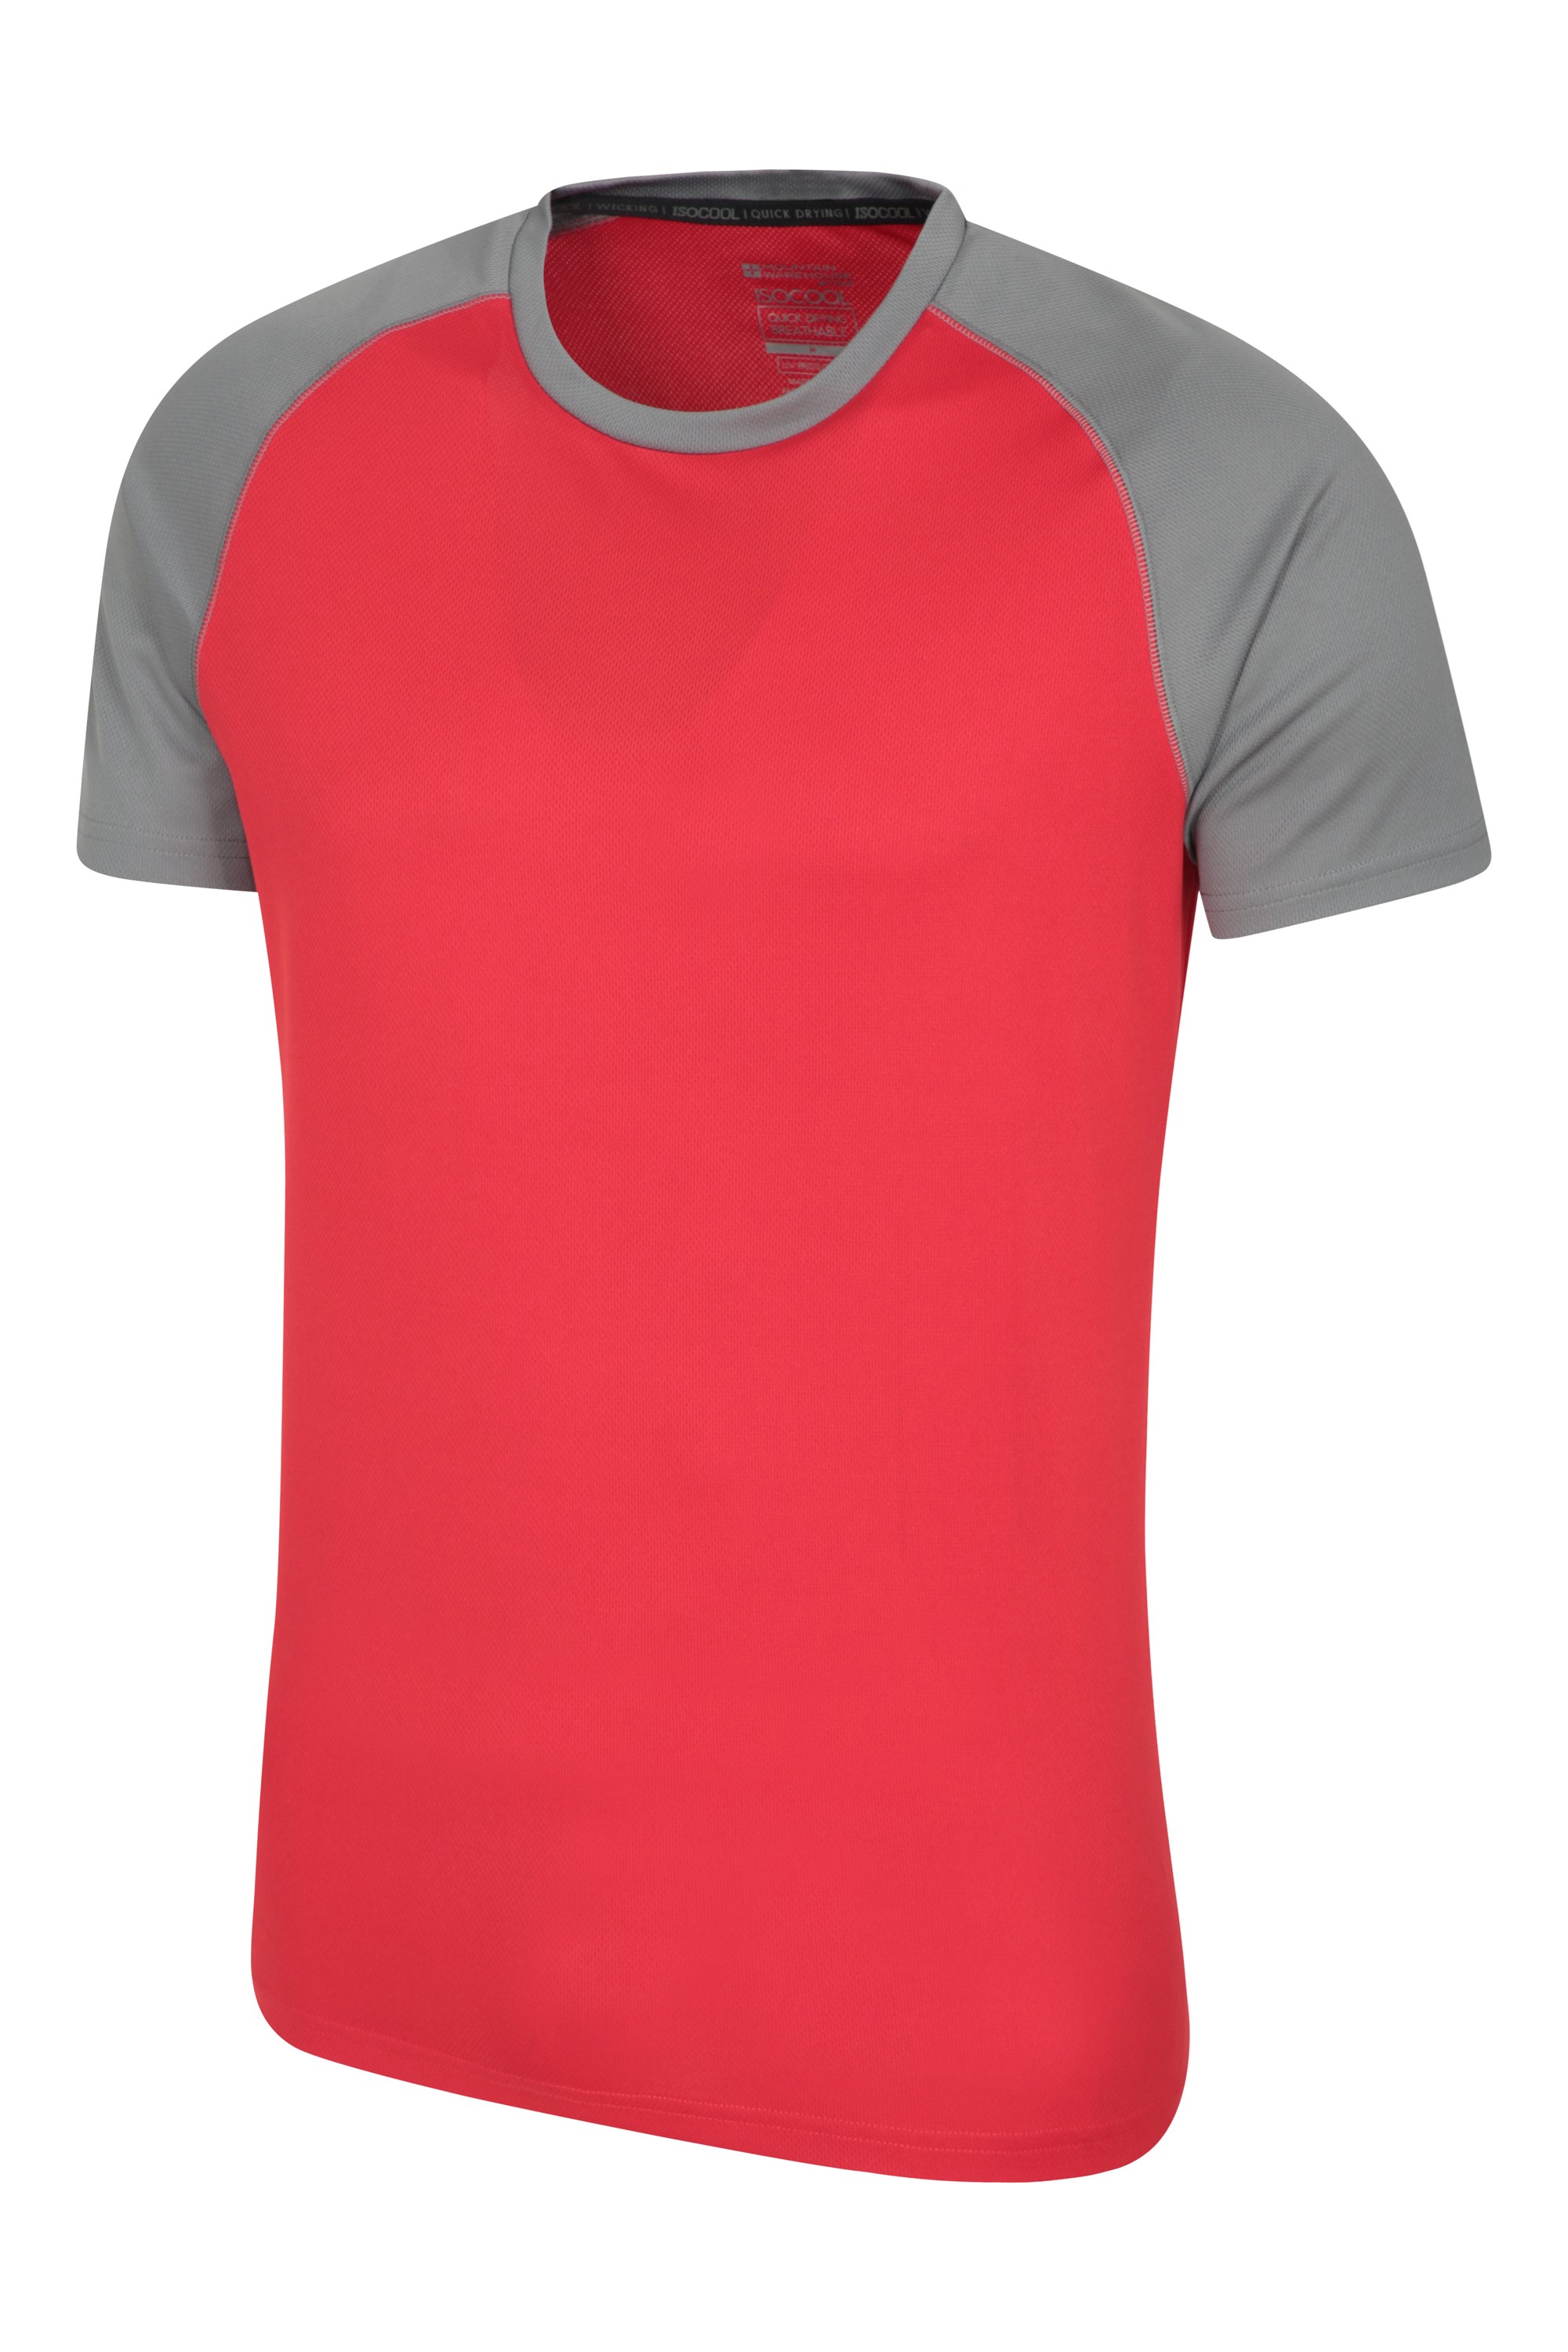 Warm Tee Shirt UV Sweat Wicking Top for Gym Cosy Outdoors Sports Lightweight T-Shirt Mountain Warehouse Cosmo Mens IsoCool Tee